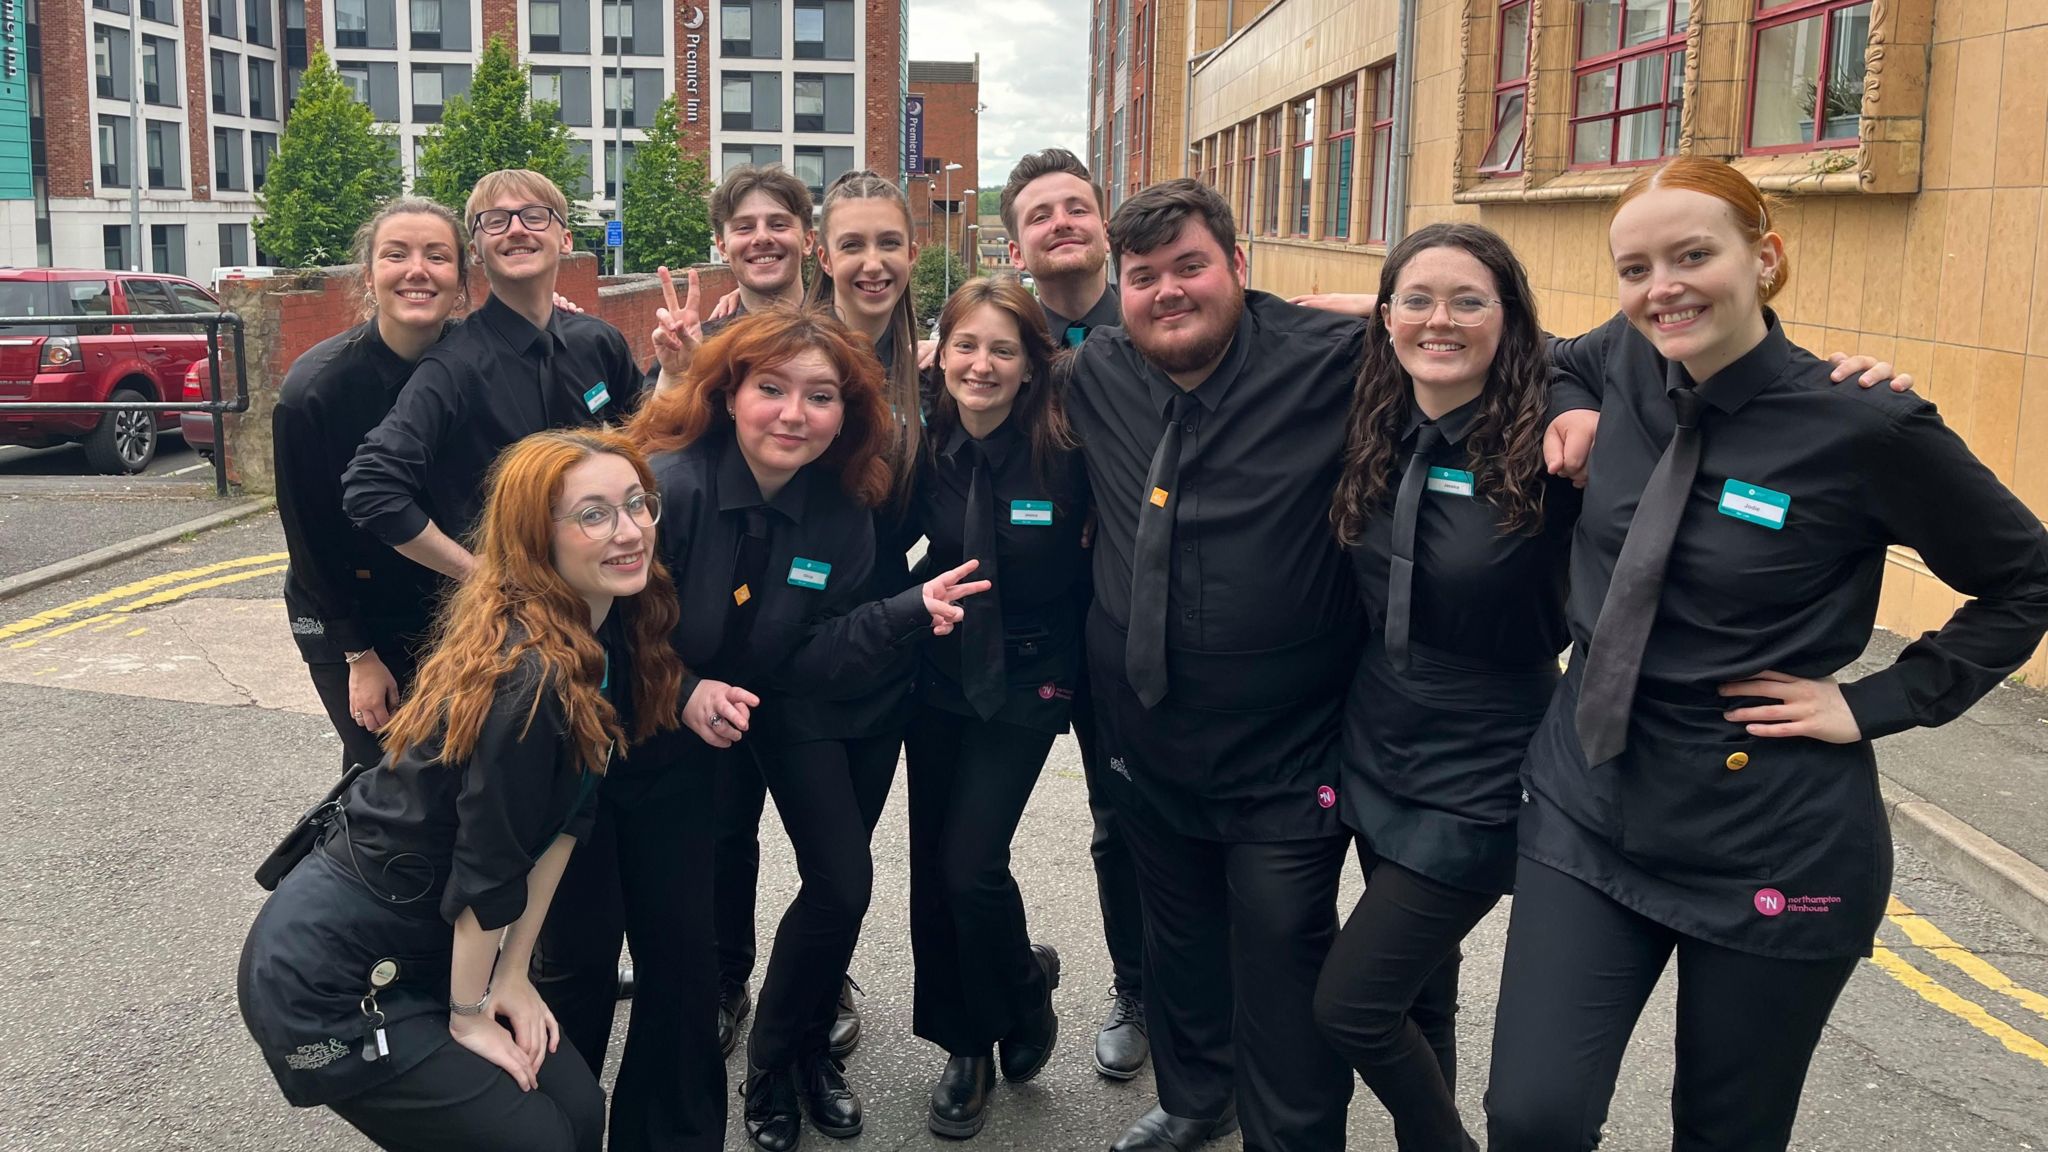 Theatre staff in all black posing outside as a group